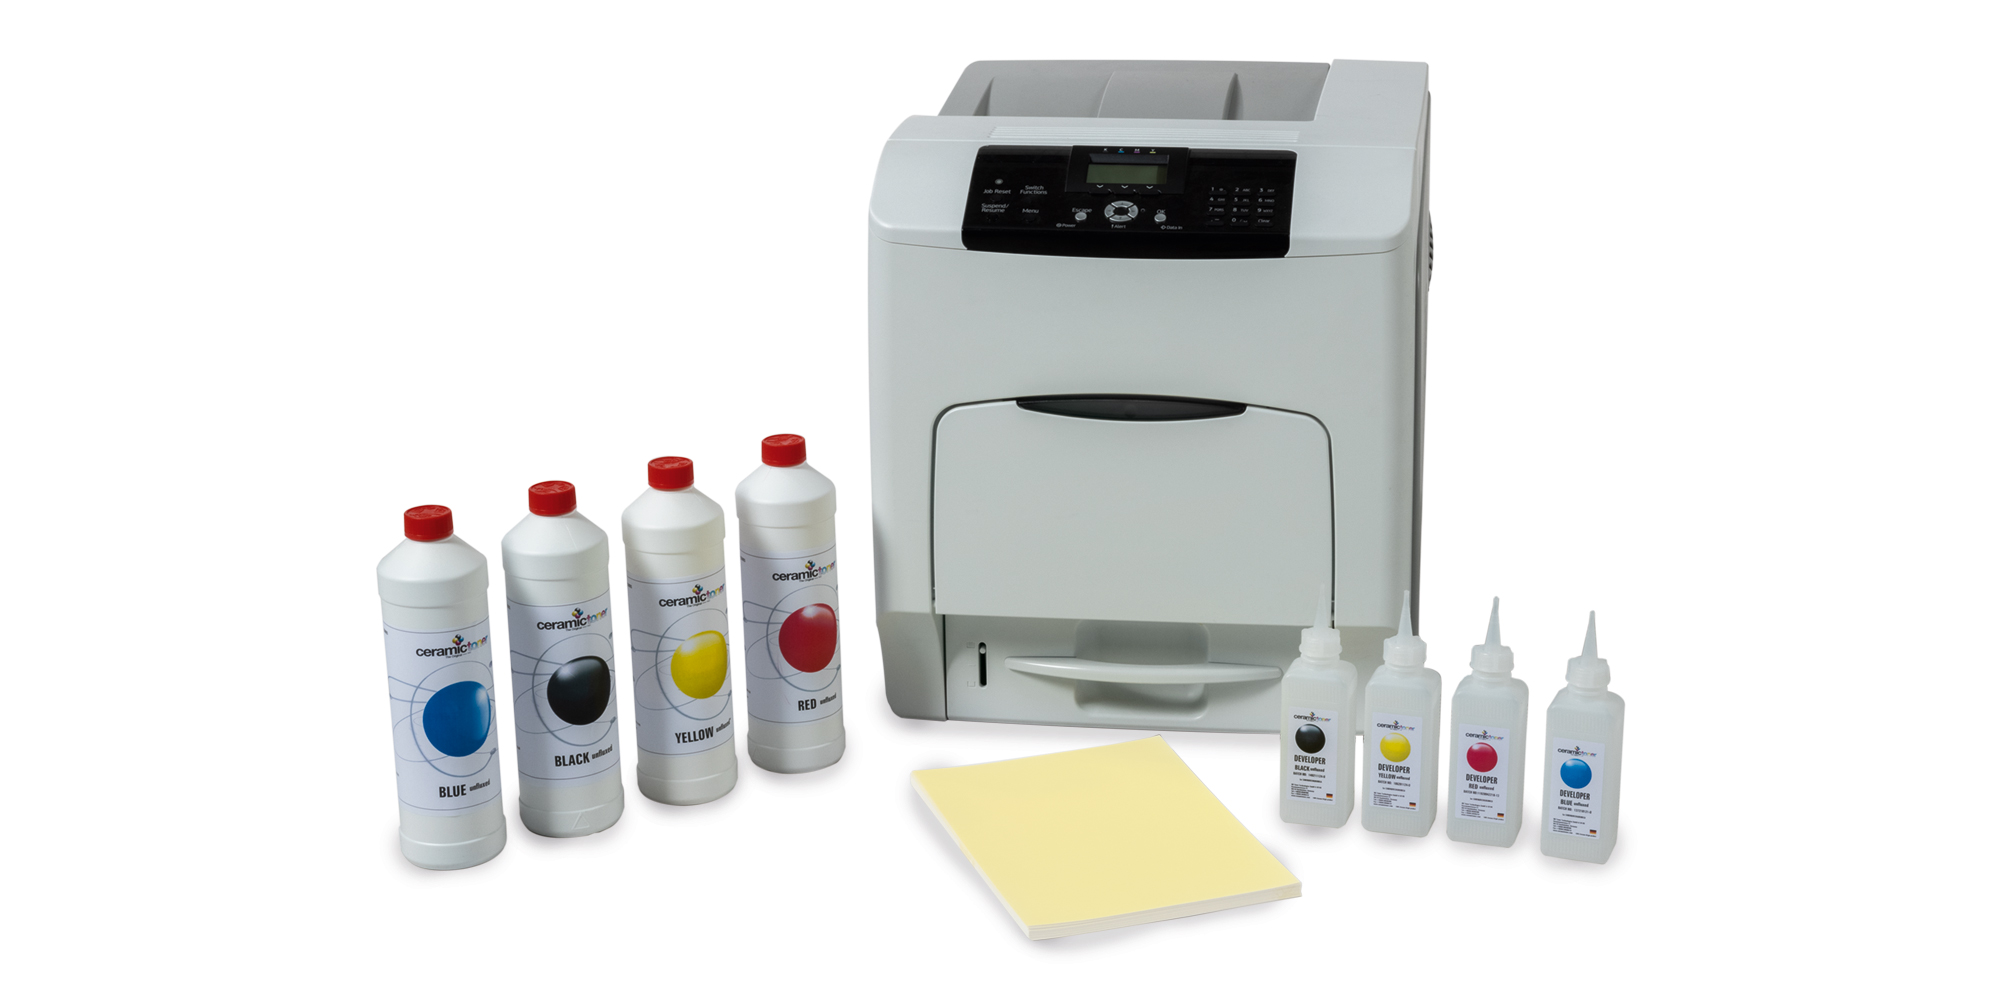 The picture shows a ceramic laser printer that can print ceramic decals, also called waterslide decals. The set also includes a toner set, direct print paper and developer.